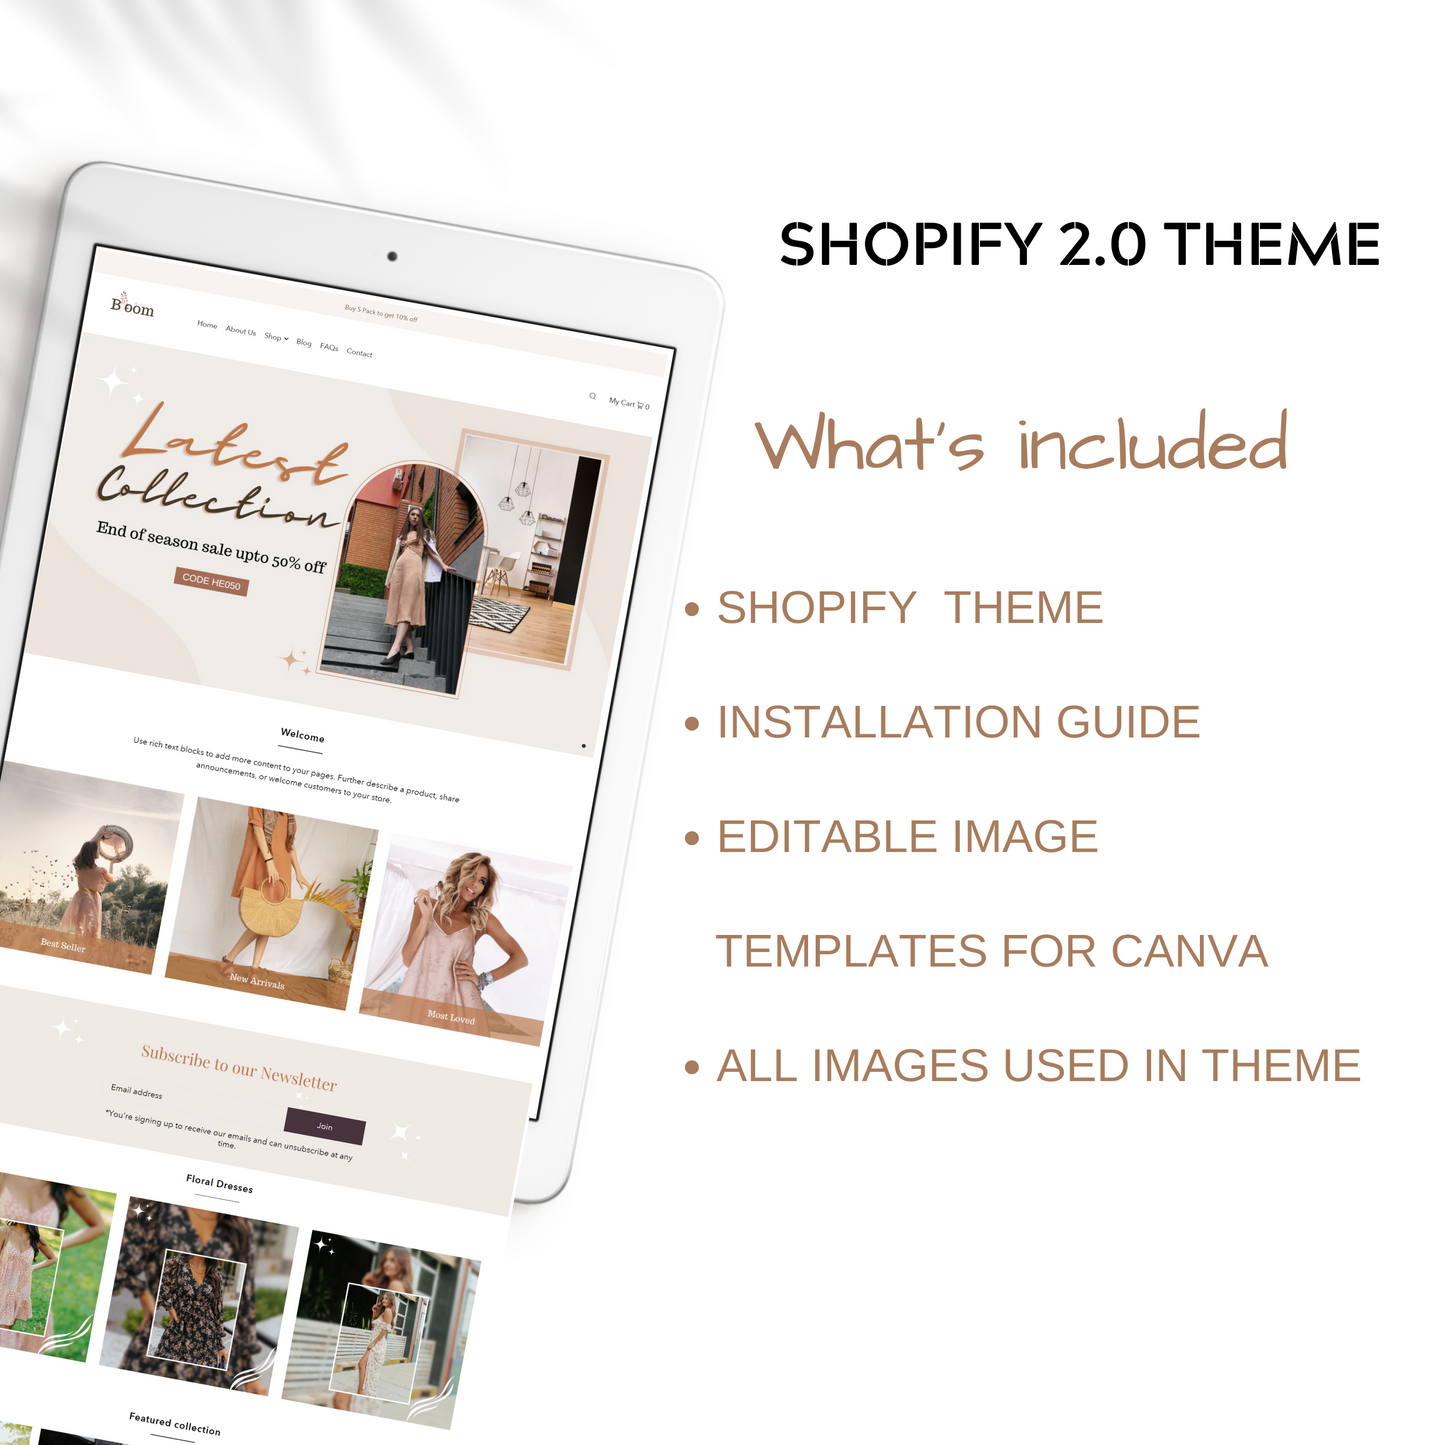 Boutique - Minimal Shopify theme, Beige Shopify Website design, Shopify theme template, Shopify 2.0, Feminine, Aesthetic, Canva banners